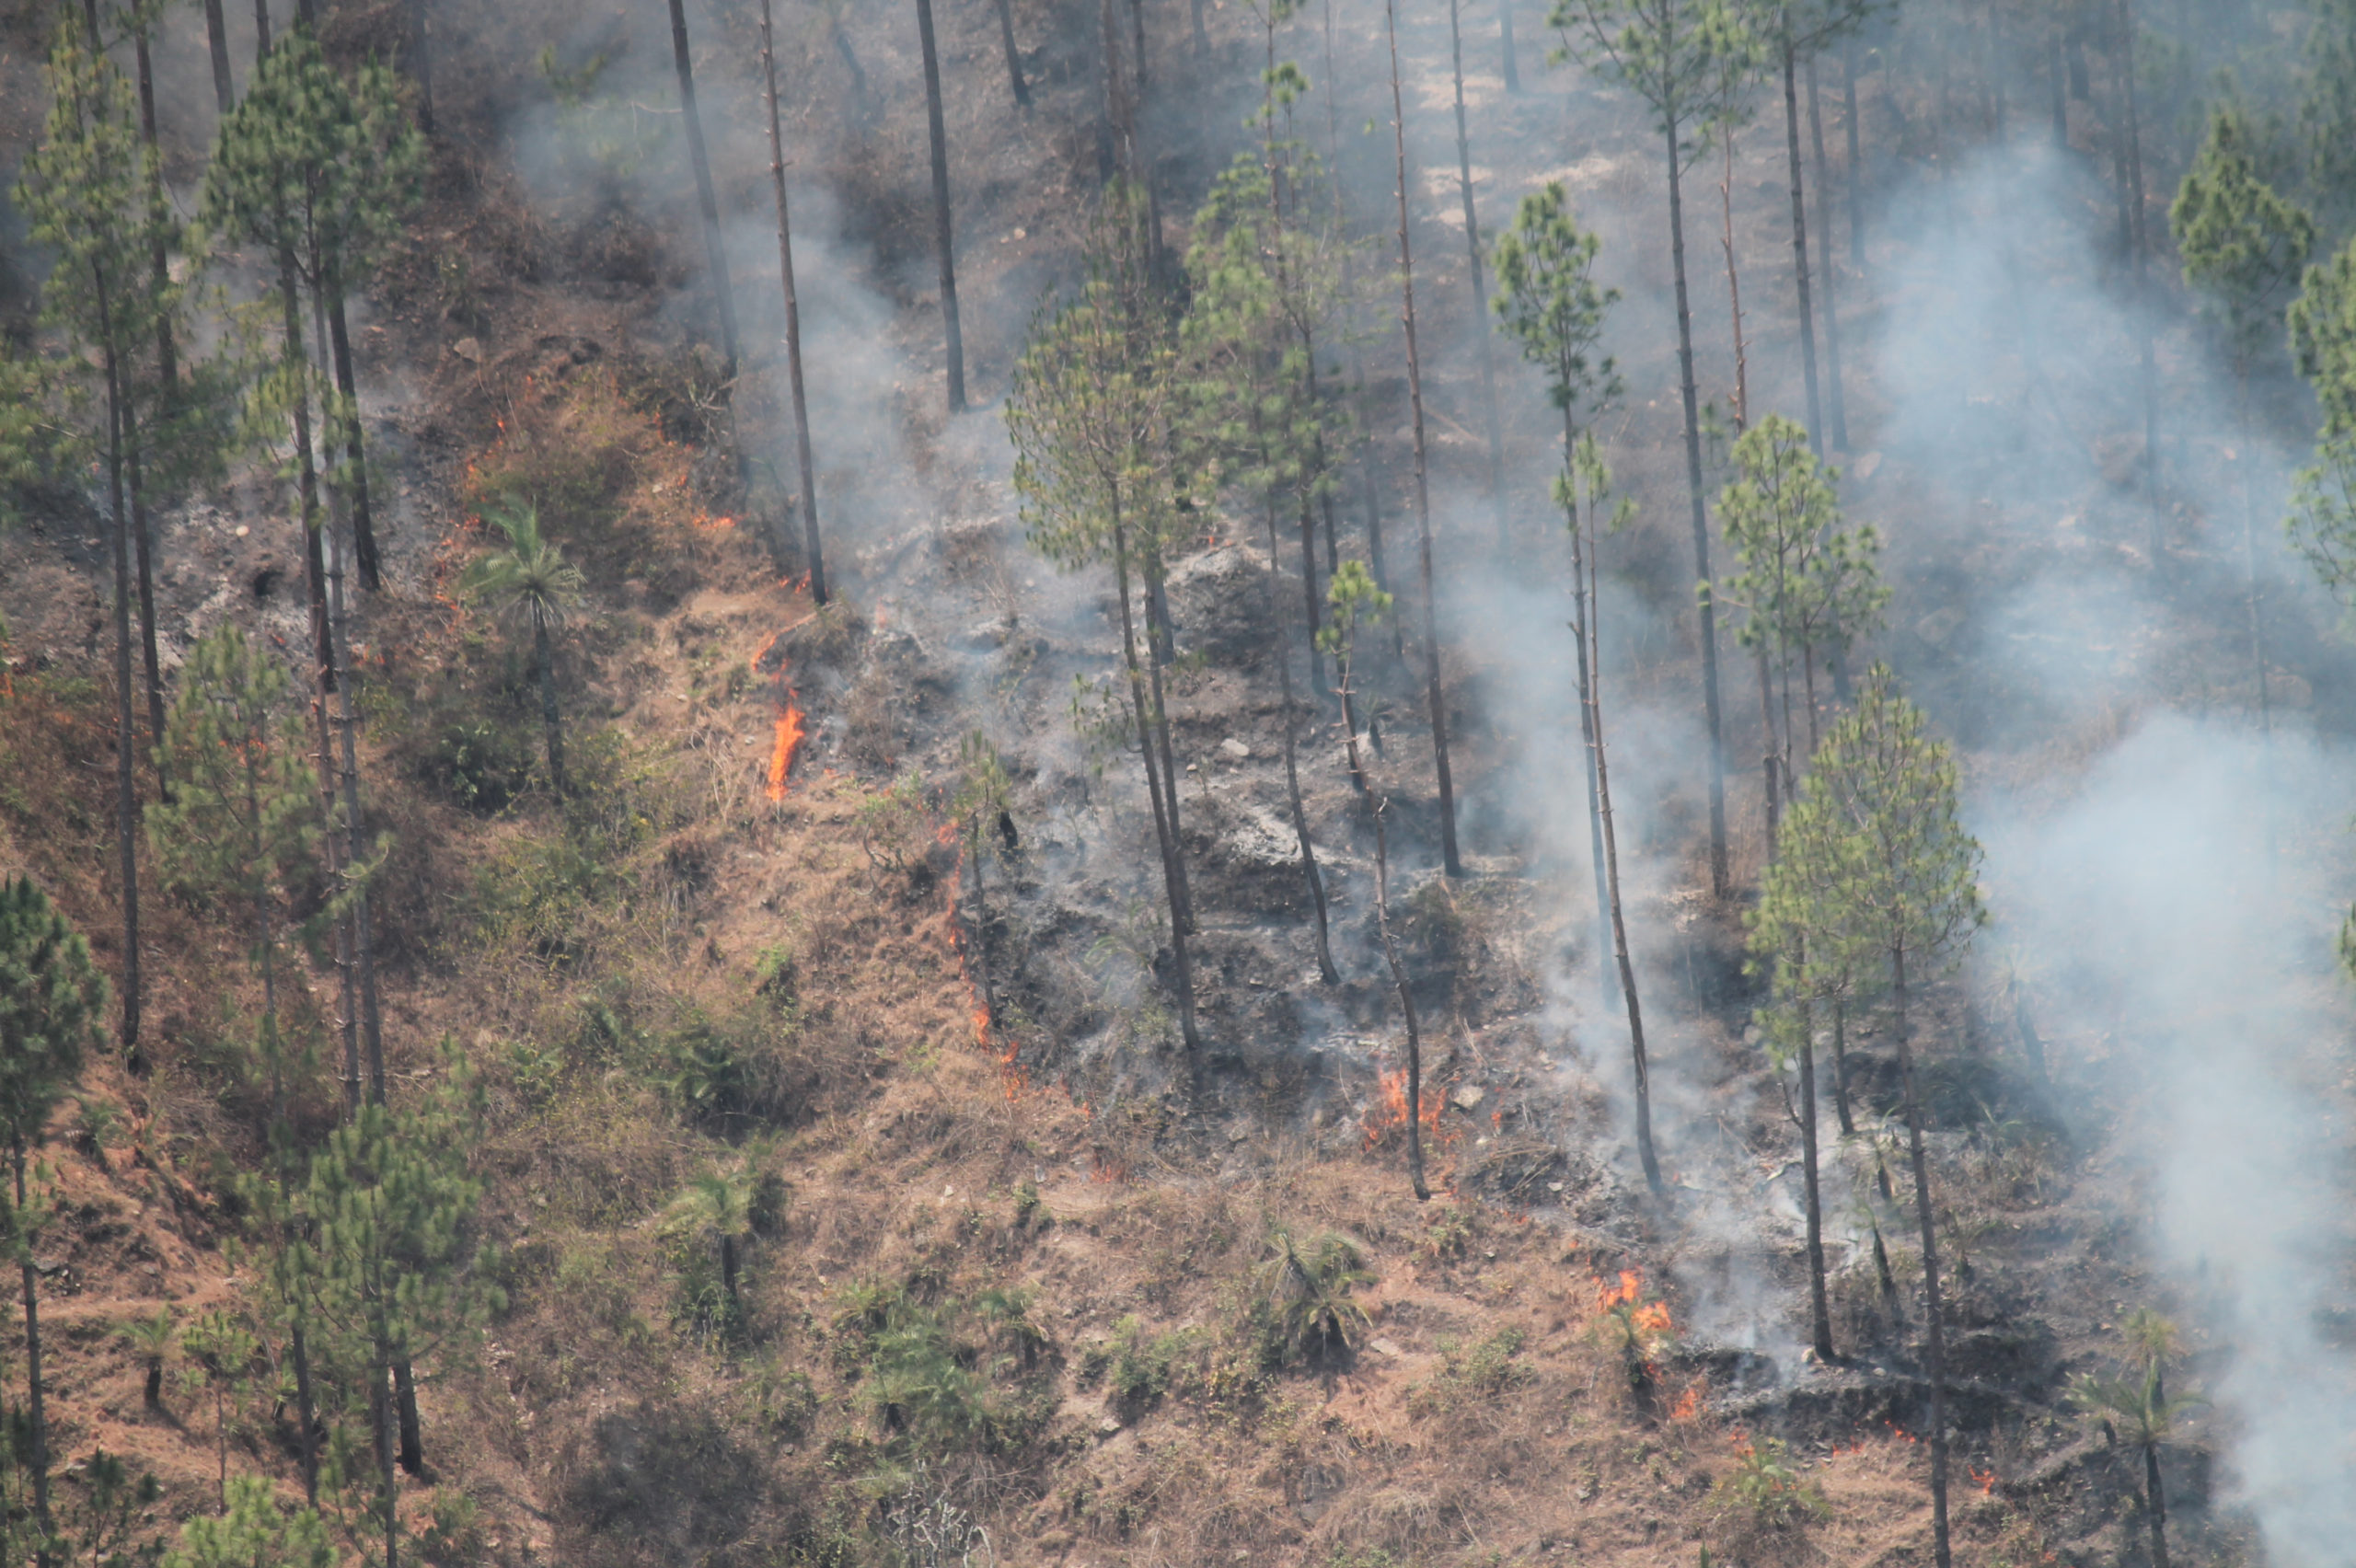 Fires ravage forests in Himalayas, threatening health and biodiversity